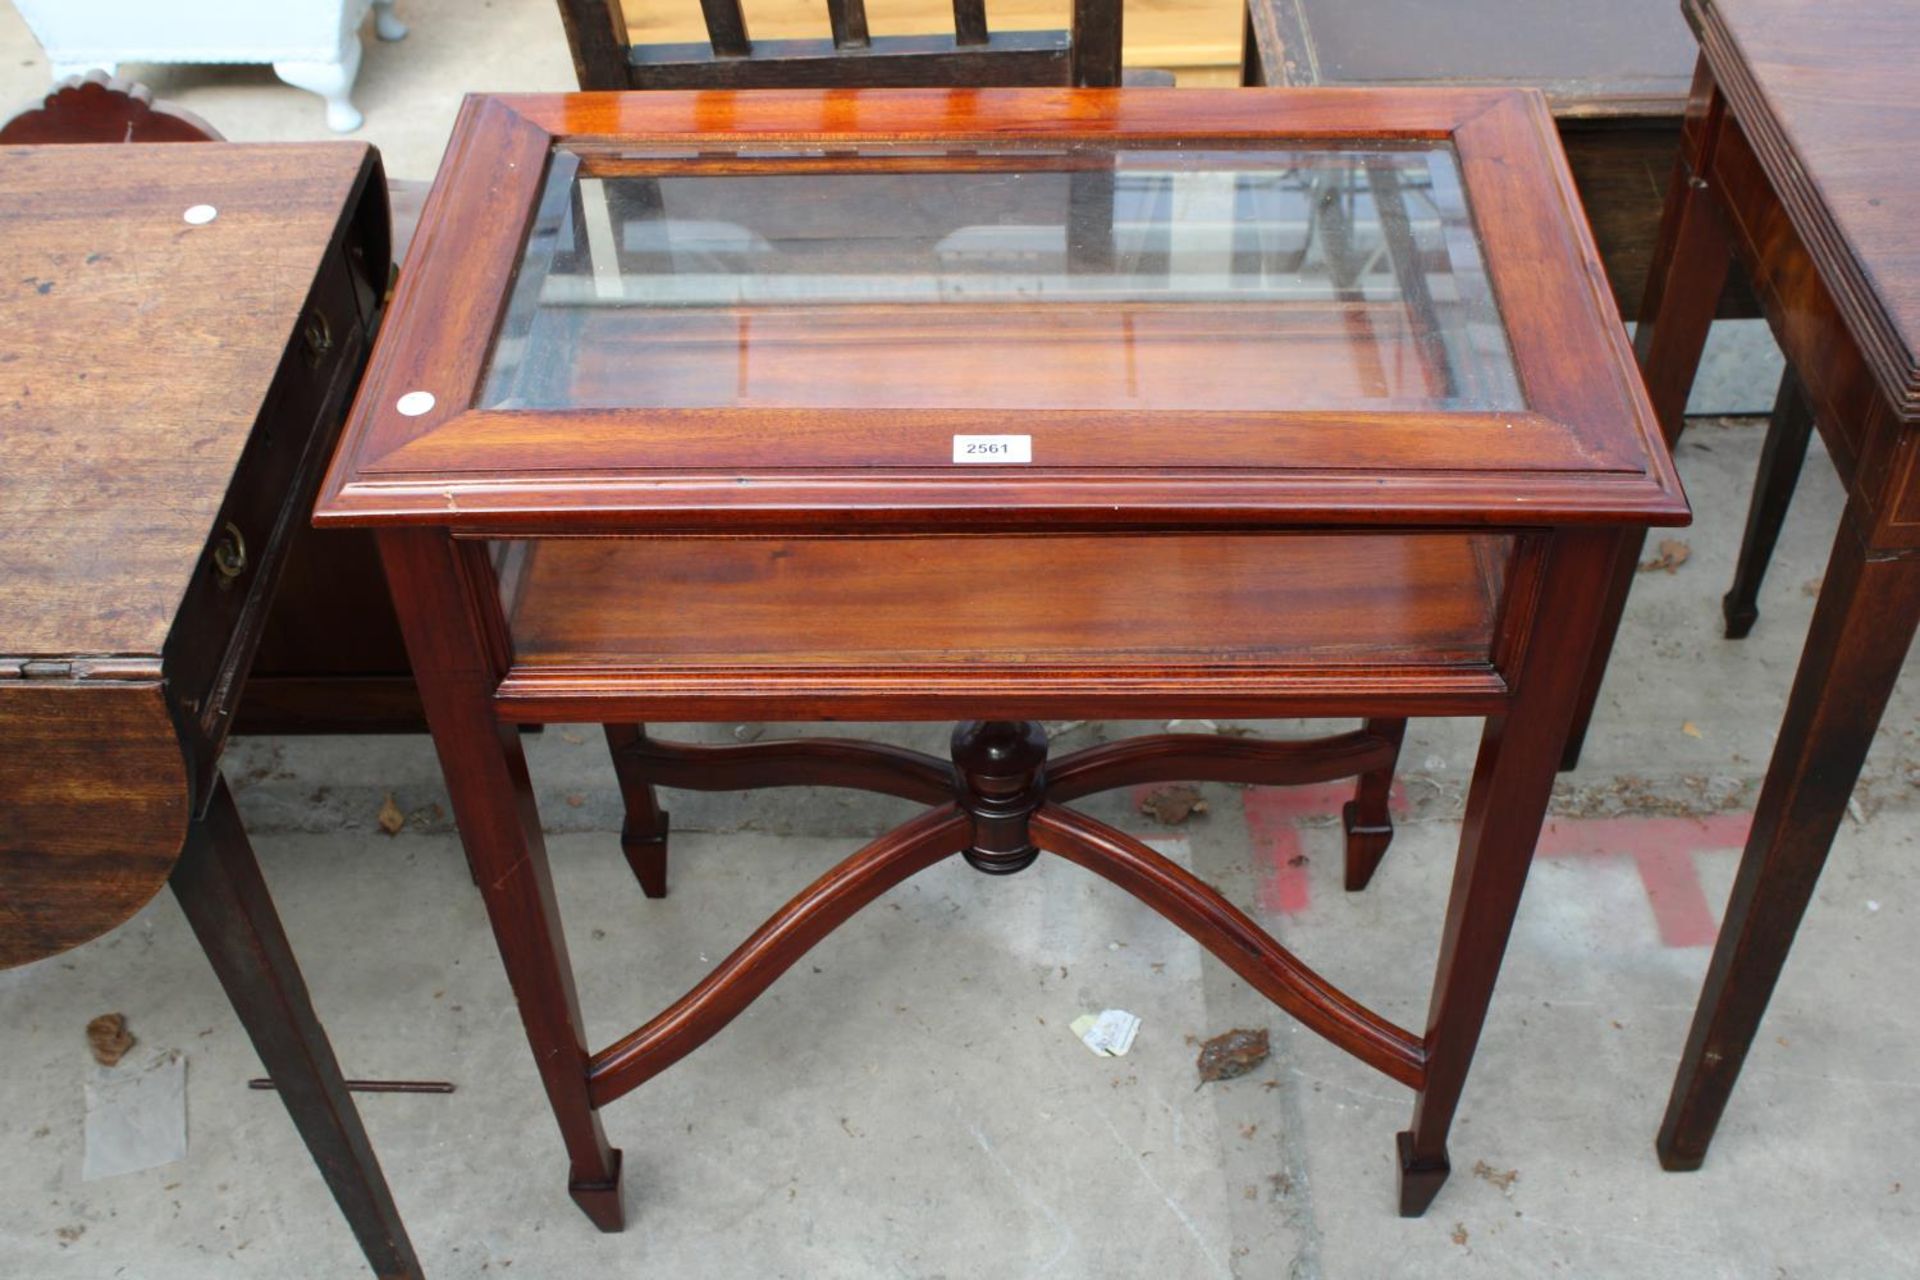 A REPRODUCTION MAHOGANY BIJOUTERIE TABLE ON TAPERING LEGS WITH SPADE FEET, 27" X 16"